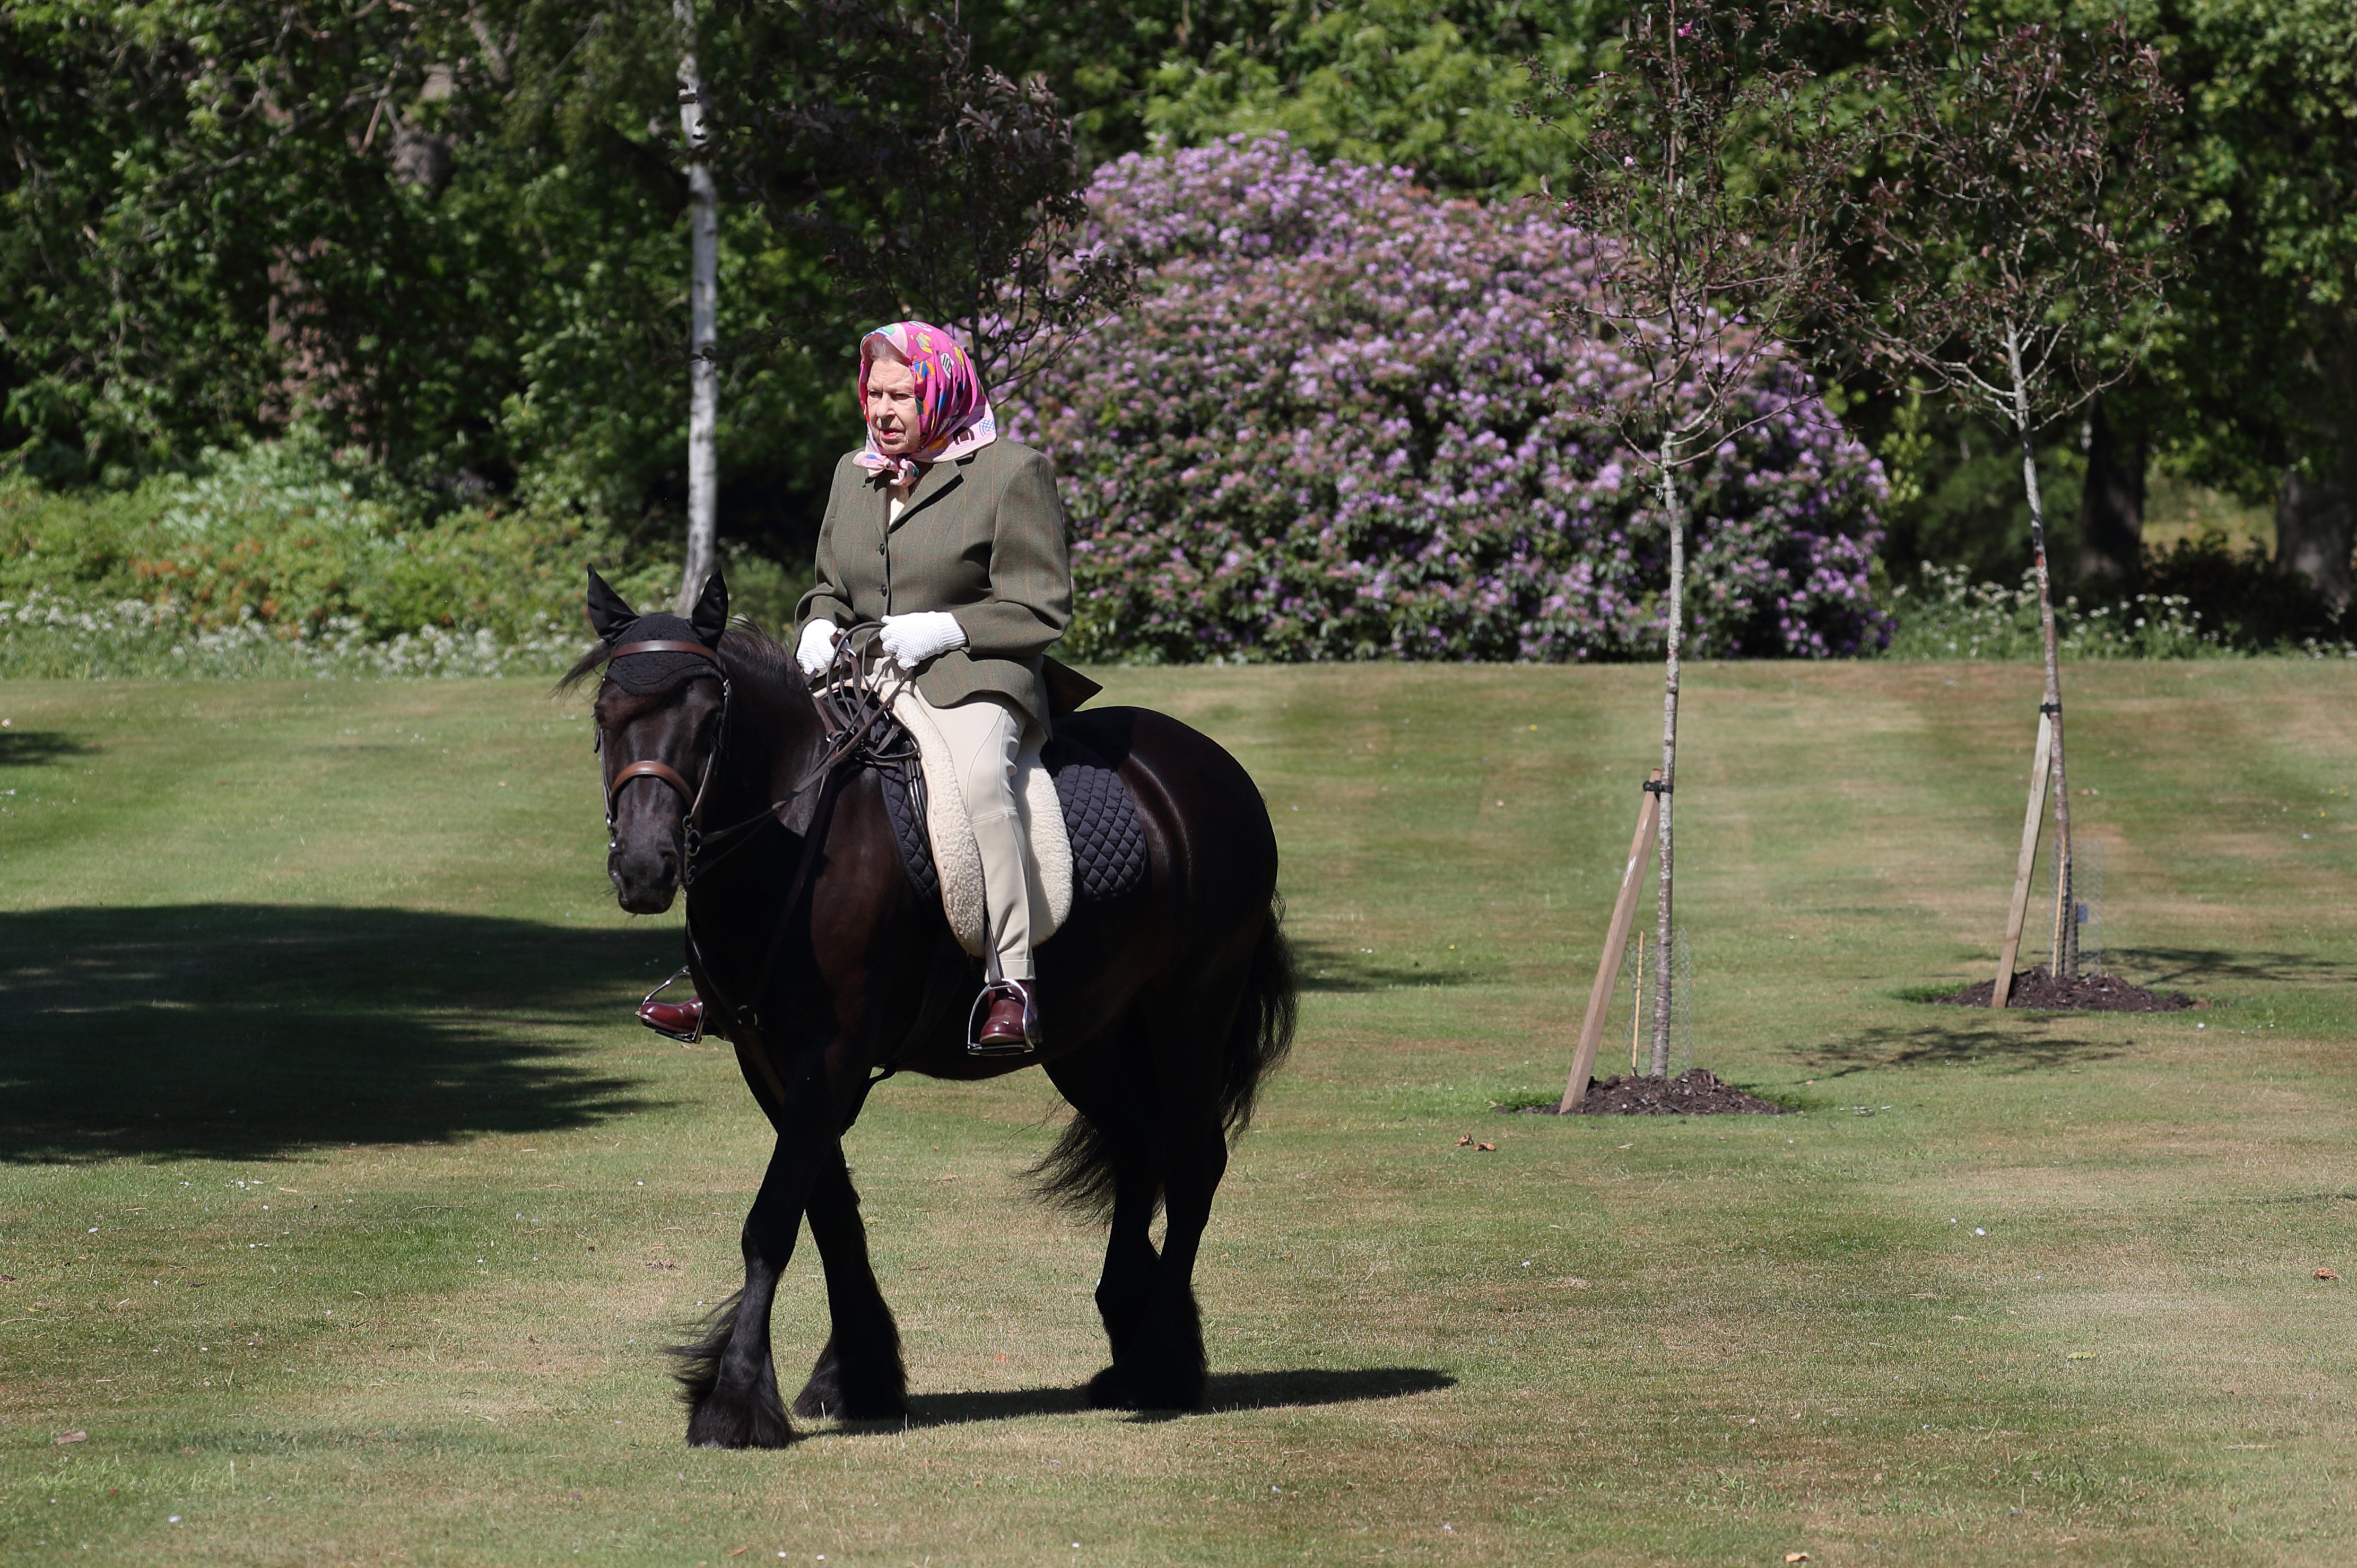 Queen Elizabeth II rides Balmoral Fern, a 14-year-old Fell Pony, in Windsor Home Park over the weekend of May 30 and May 31, 2020, in Windsor, England. | Source: Getty Images.